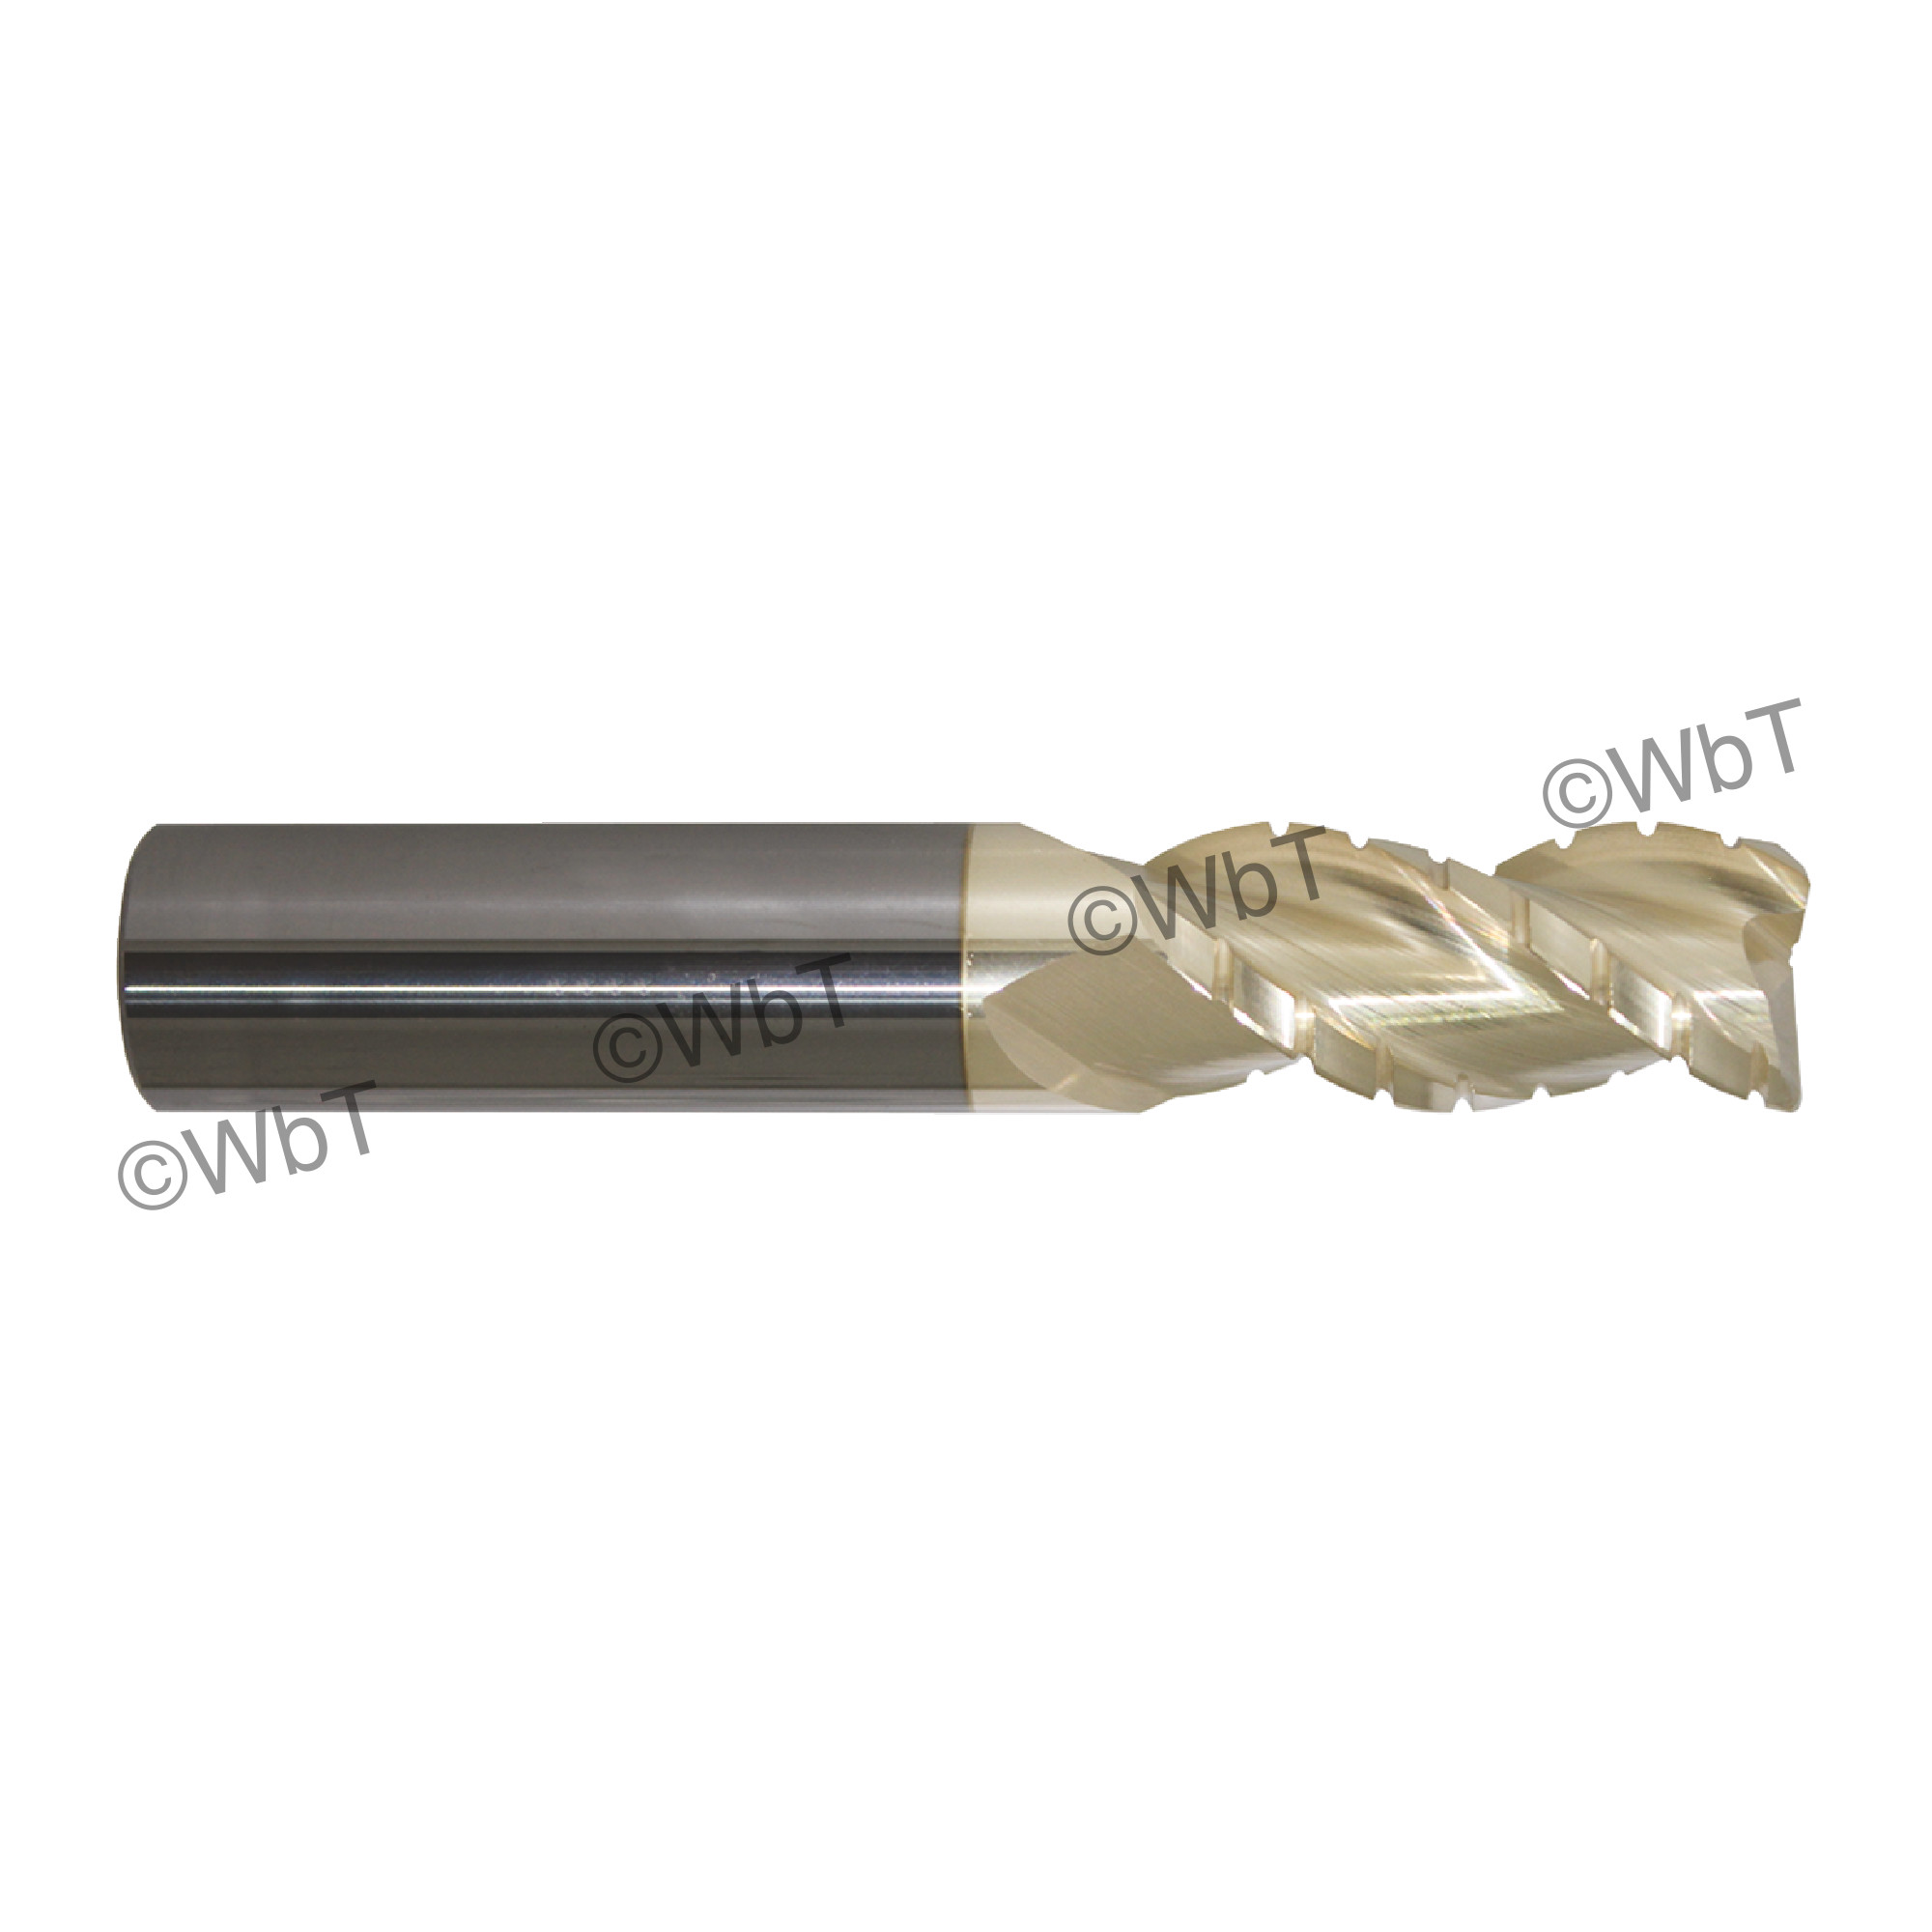 Promax Solid Carbide 3 Flute Roughing-Finishing Corner Radius End Mill 1" 119-06416 Series 119